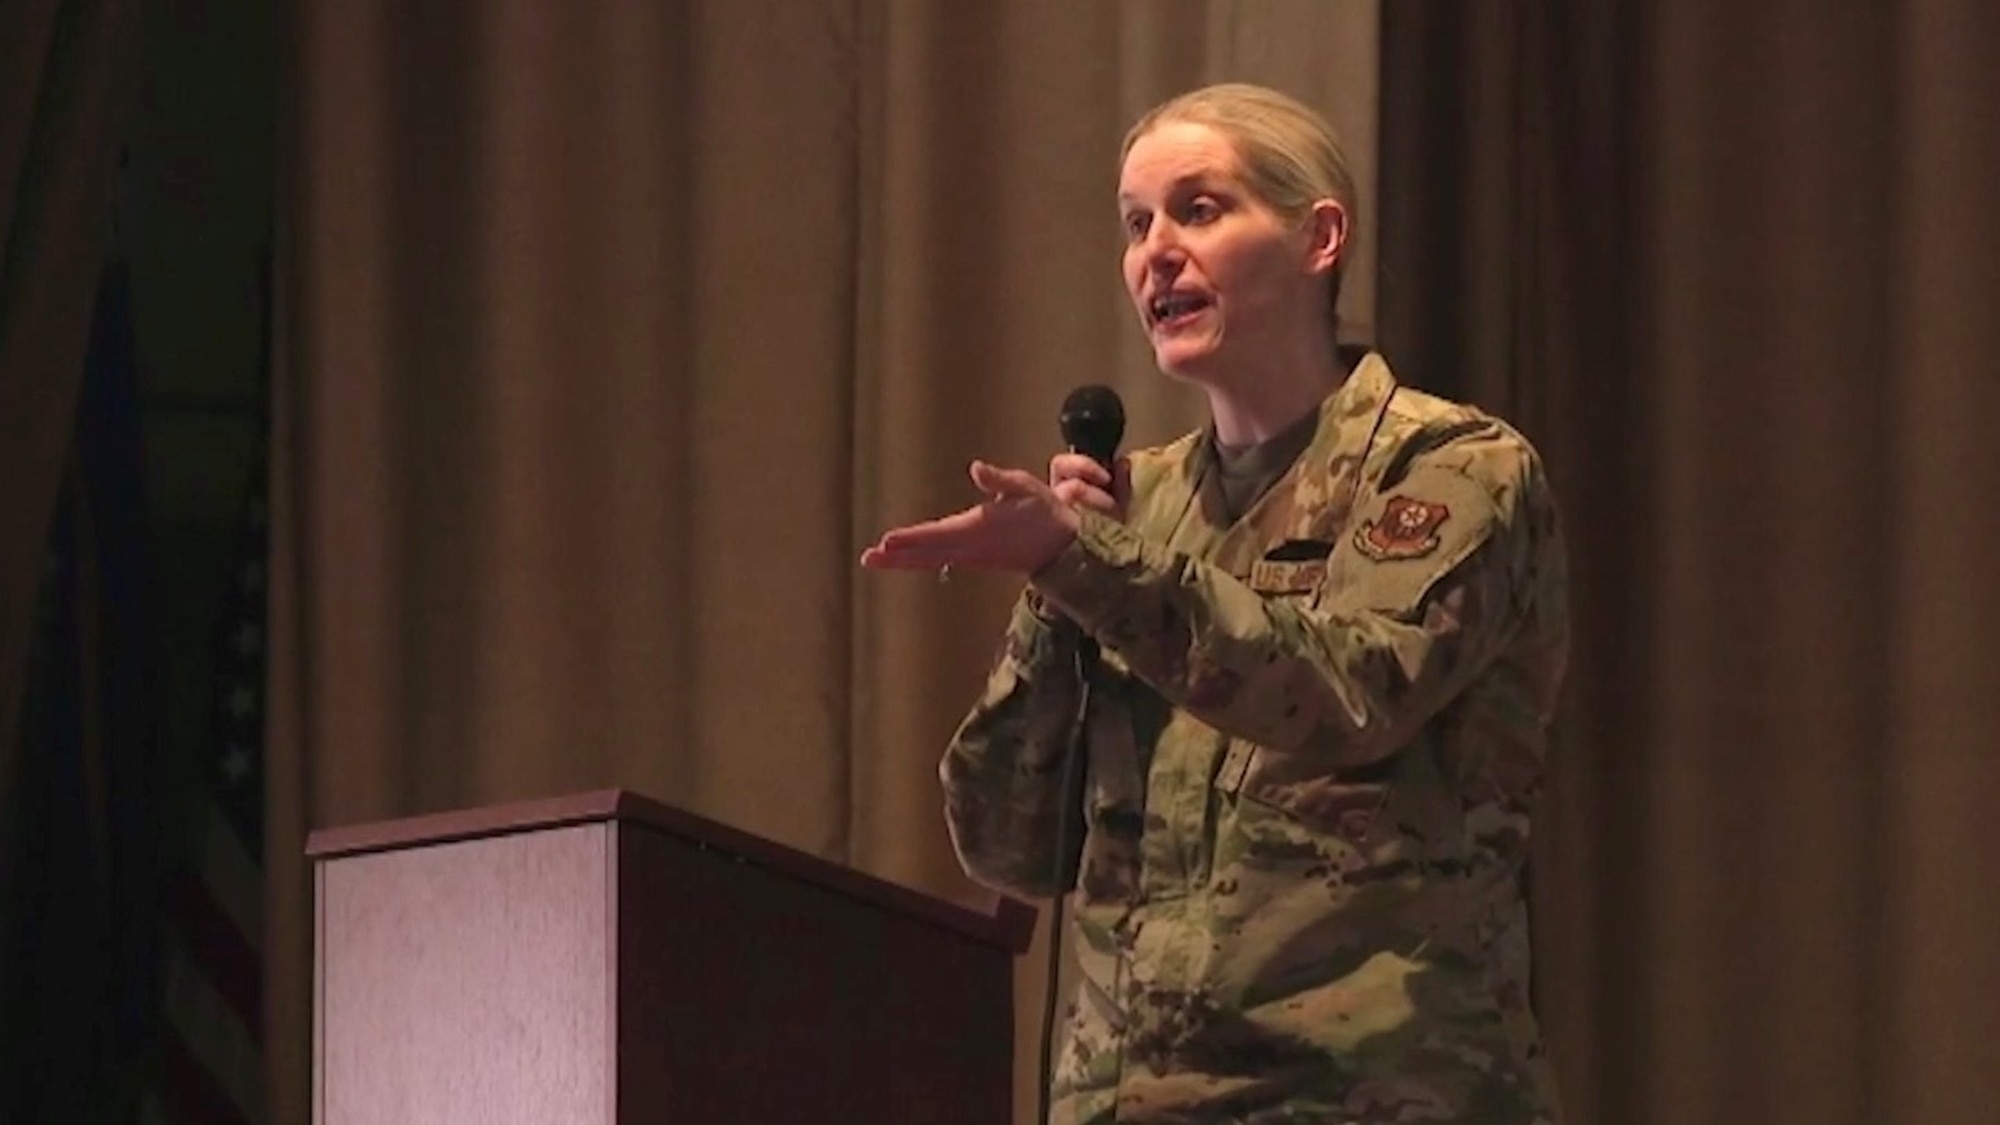 A woman in military uniform stands behind a podium on stage speaking into a microphone she is holding.